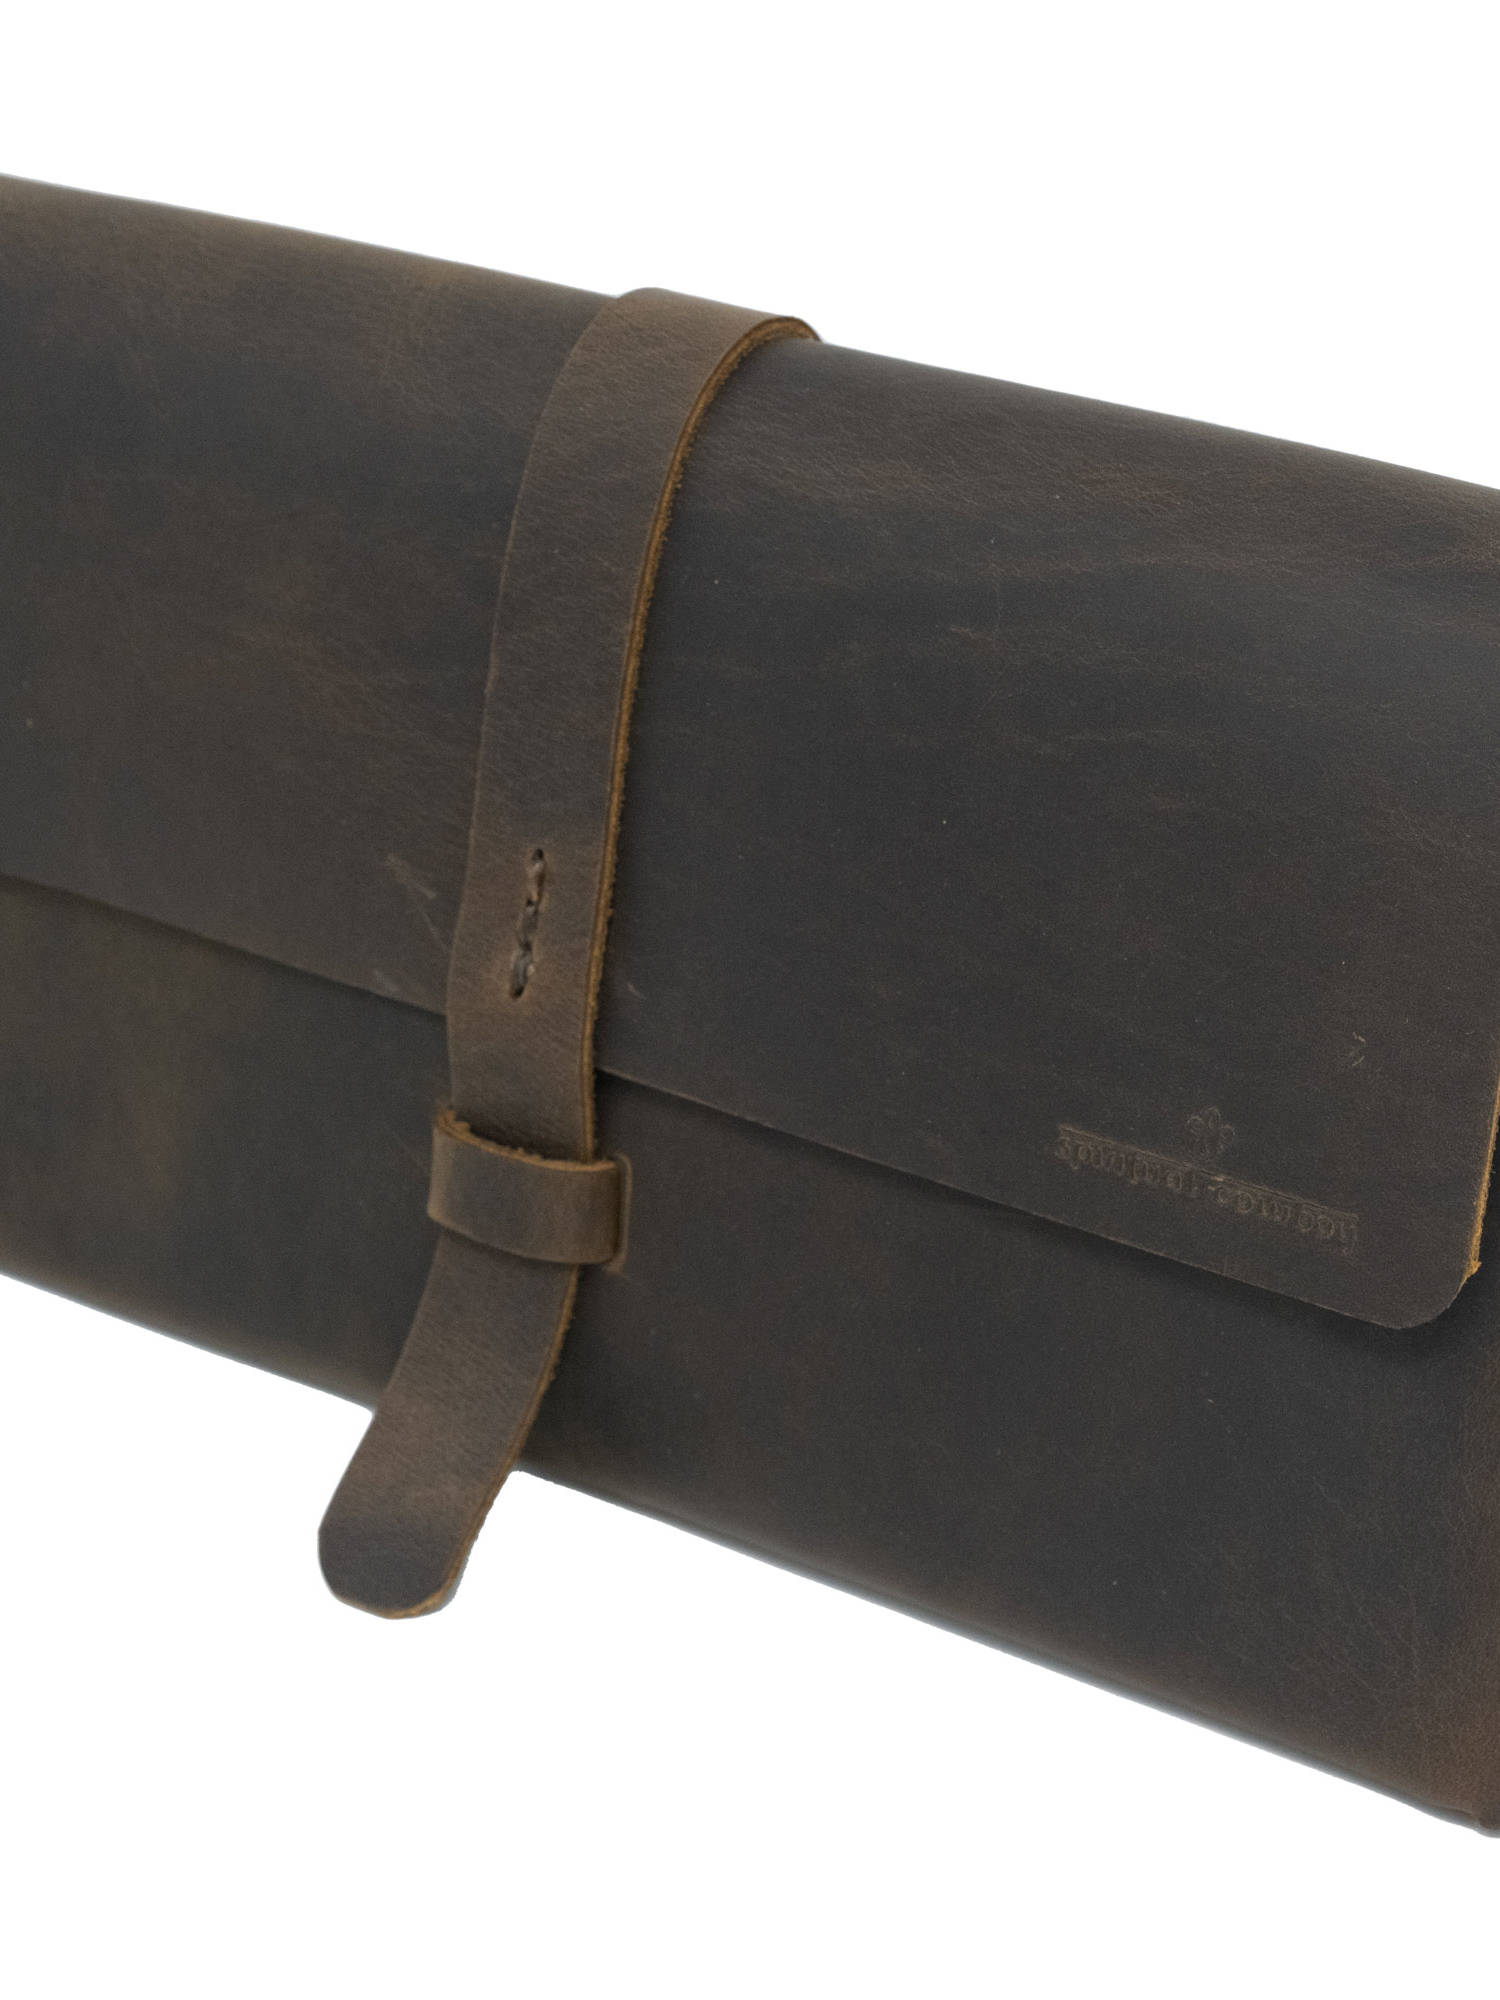 Clutch Bag No 317 Crazy Horse Brown Leather Front